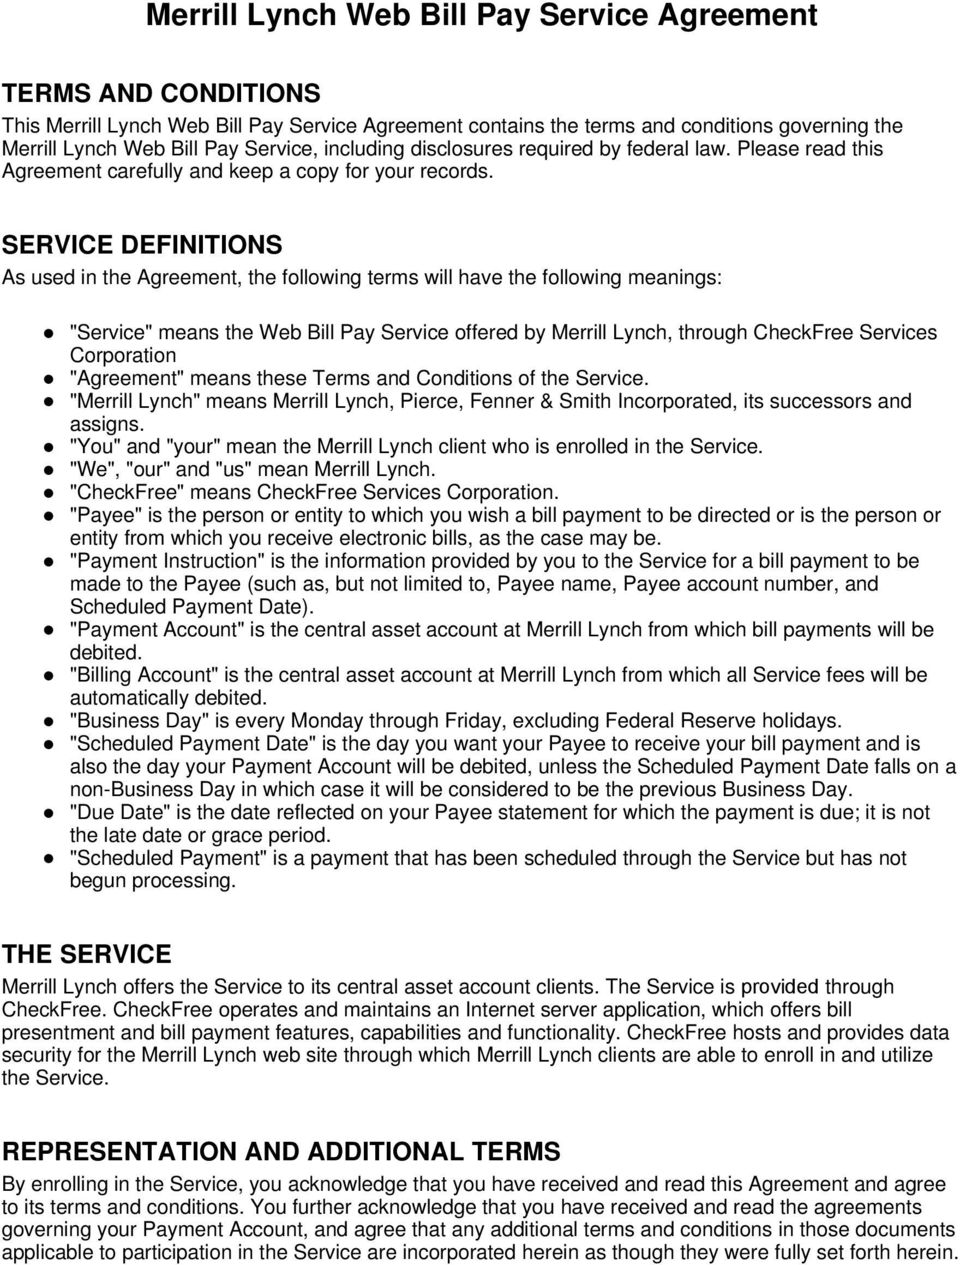 SERVICE DEFINITIONS As used in the Agreement, the following terms will have the following meanings: "Service" means the Web Bill Pay Service offered by Merrill Lynch, through CheckFree Services